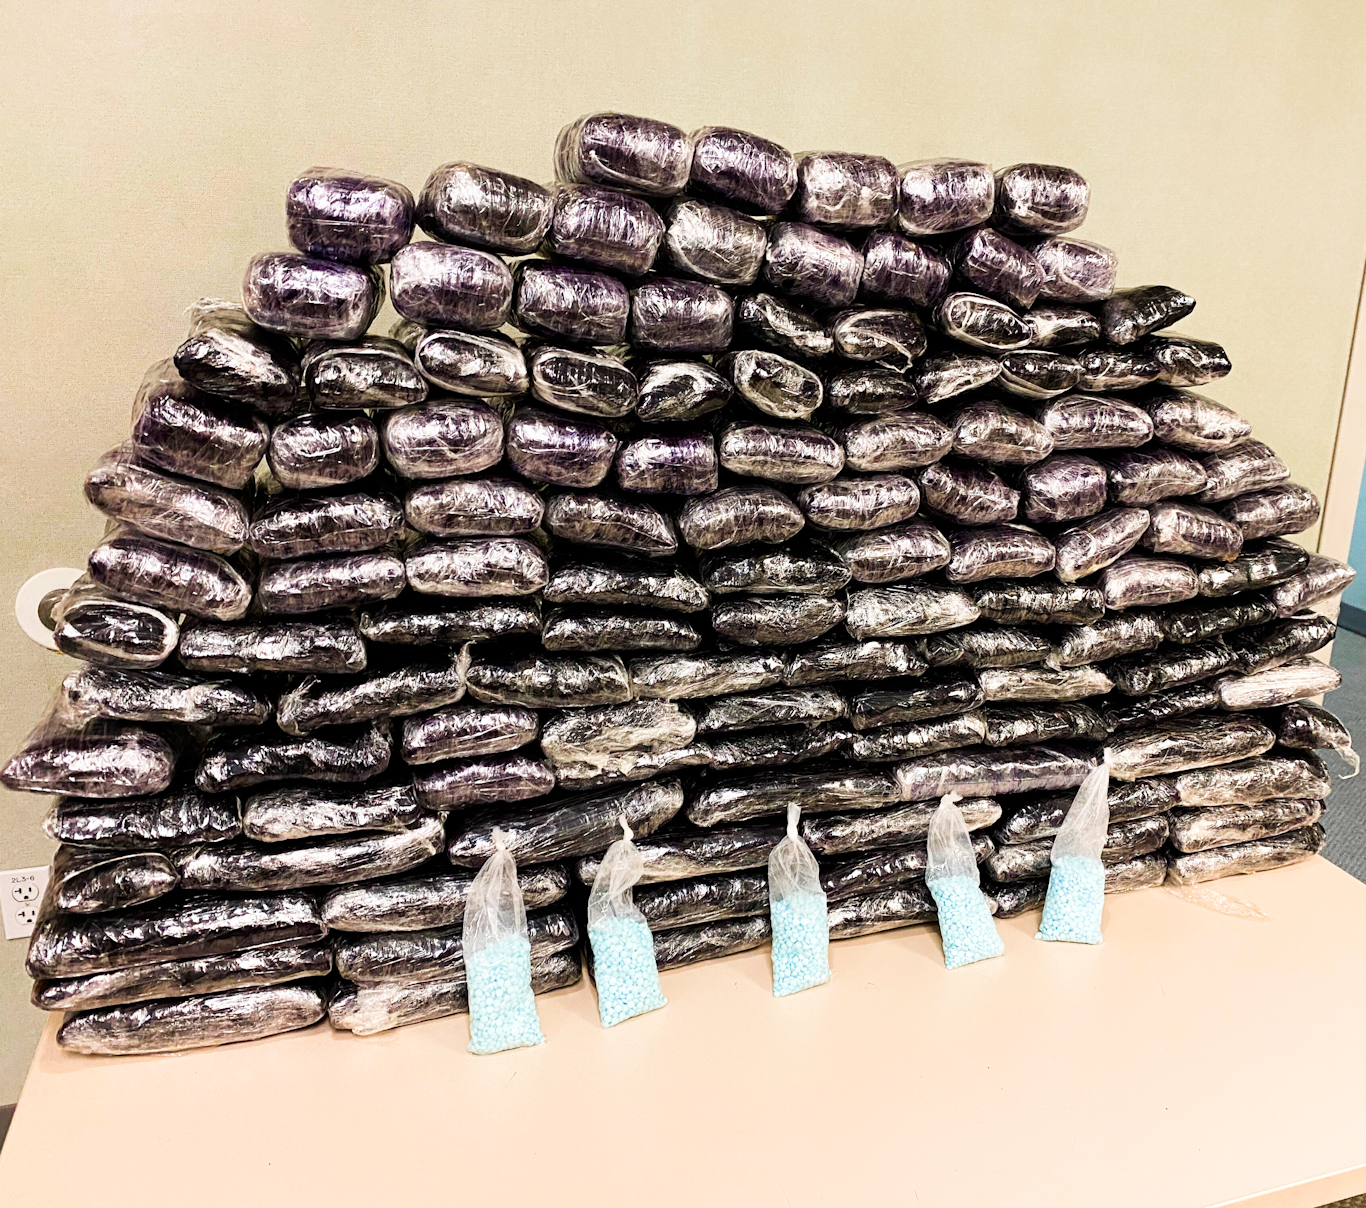 Approximately 1 million fake pills containing fentanyl seized on July 5, 2022, at a home in Inglewood, Calif. Photo: DEA via AP.